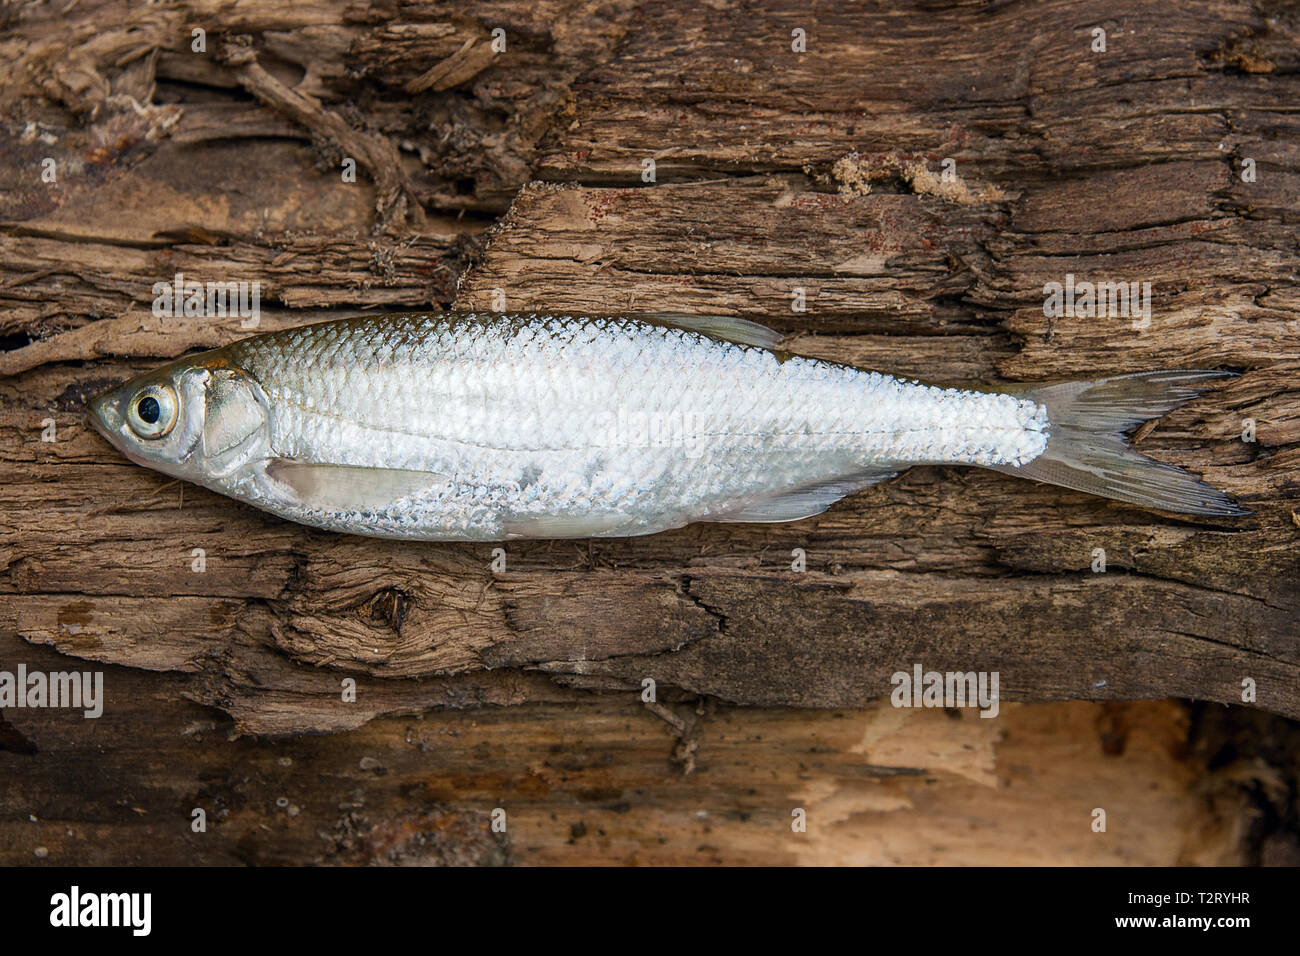 Freshwater fish just taken from the water. Bleak fish on natural background. Catching fish - common bleak. Stock Photo